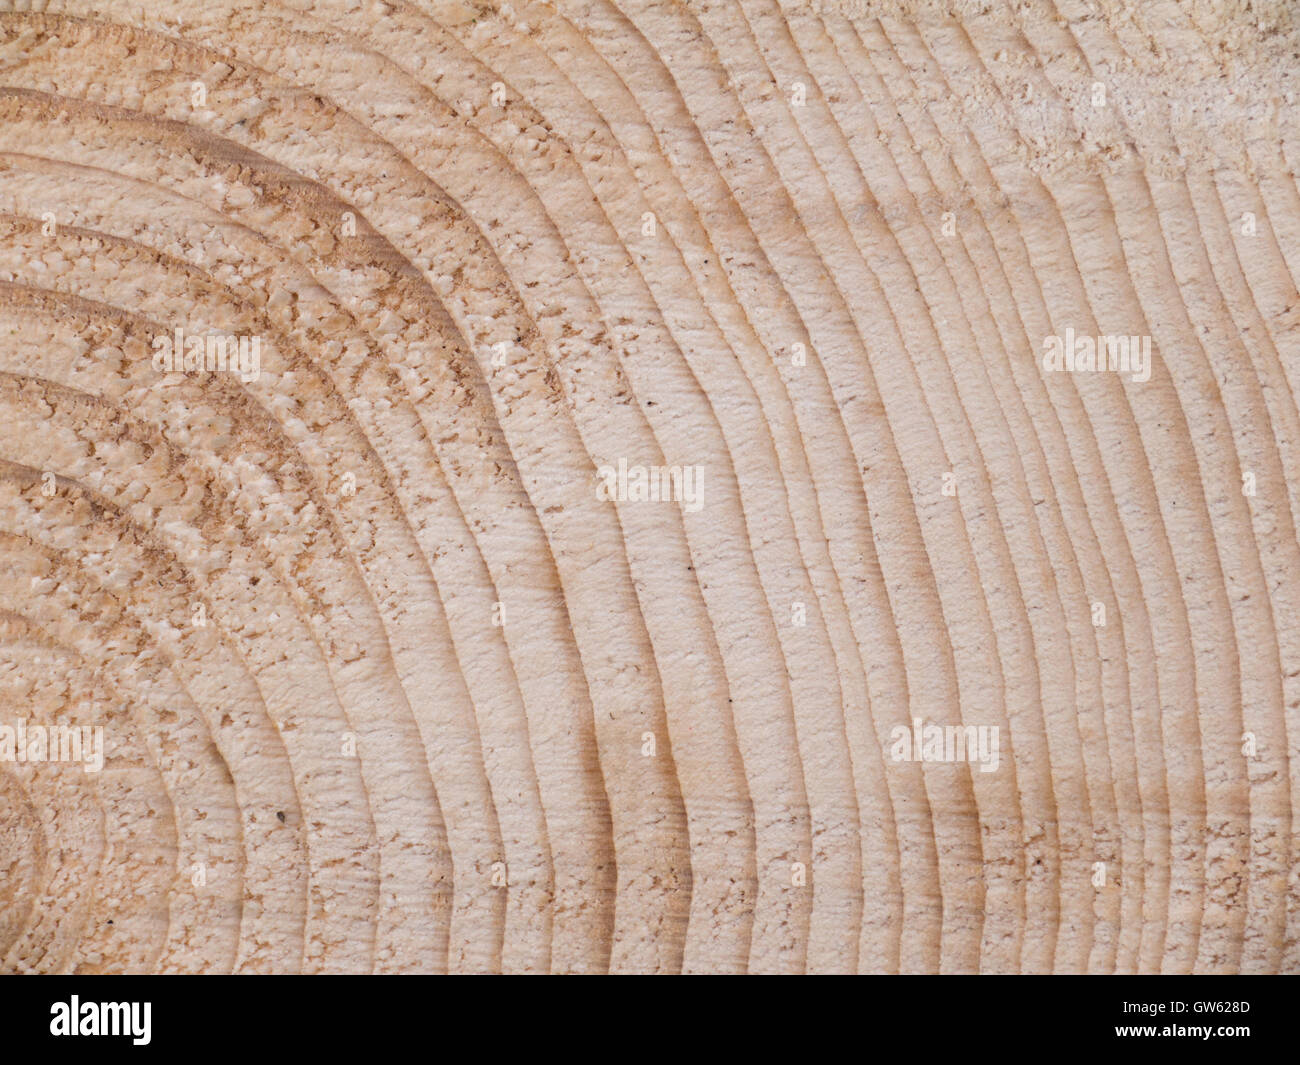 Pine wood log cross-section with annual rings Stock Photo